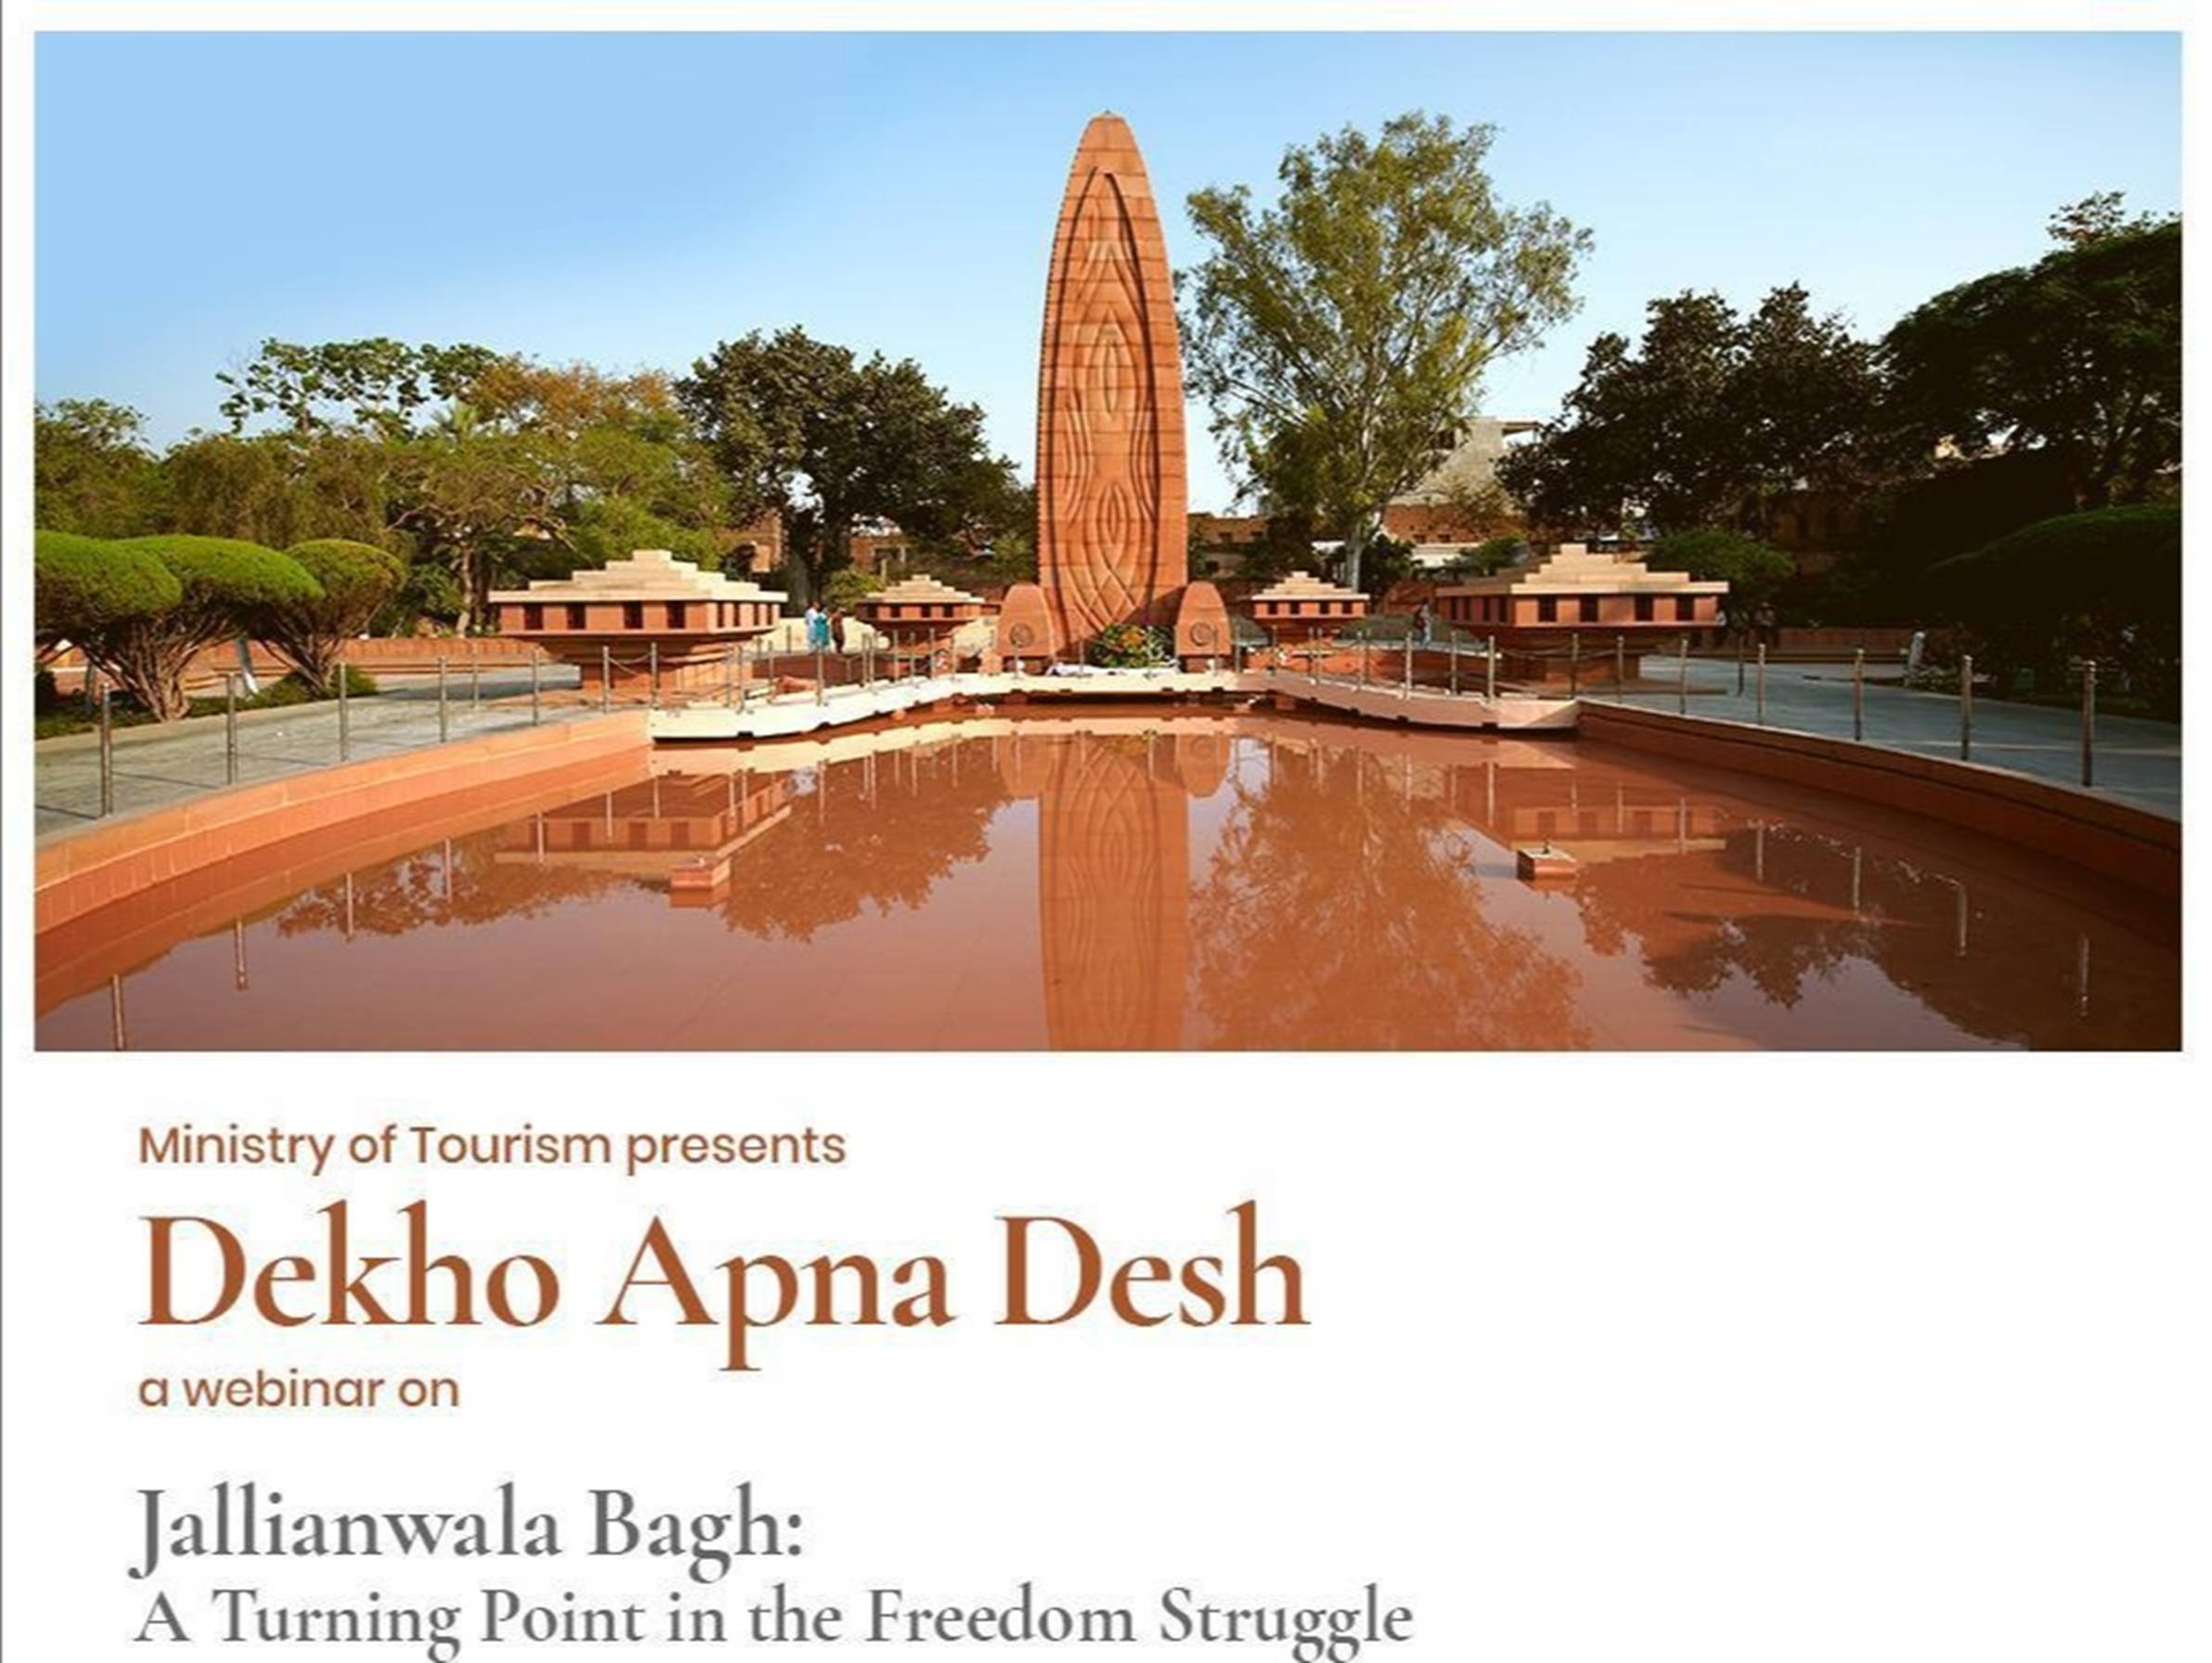 MINISTRY OF TOURISM PRESENTS4TH INDEPENDENCE DAY THEMED WEBINAR- JALLIANWALA BAGH: A TURNING POINT IN THE FREEDOM STRUGGLE UNDER DEKHO APNA DESH SERIES - EDUCRATSWEB.COM